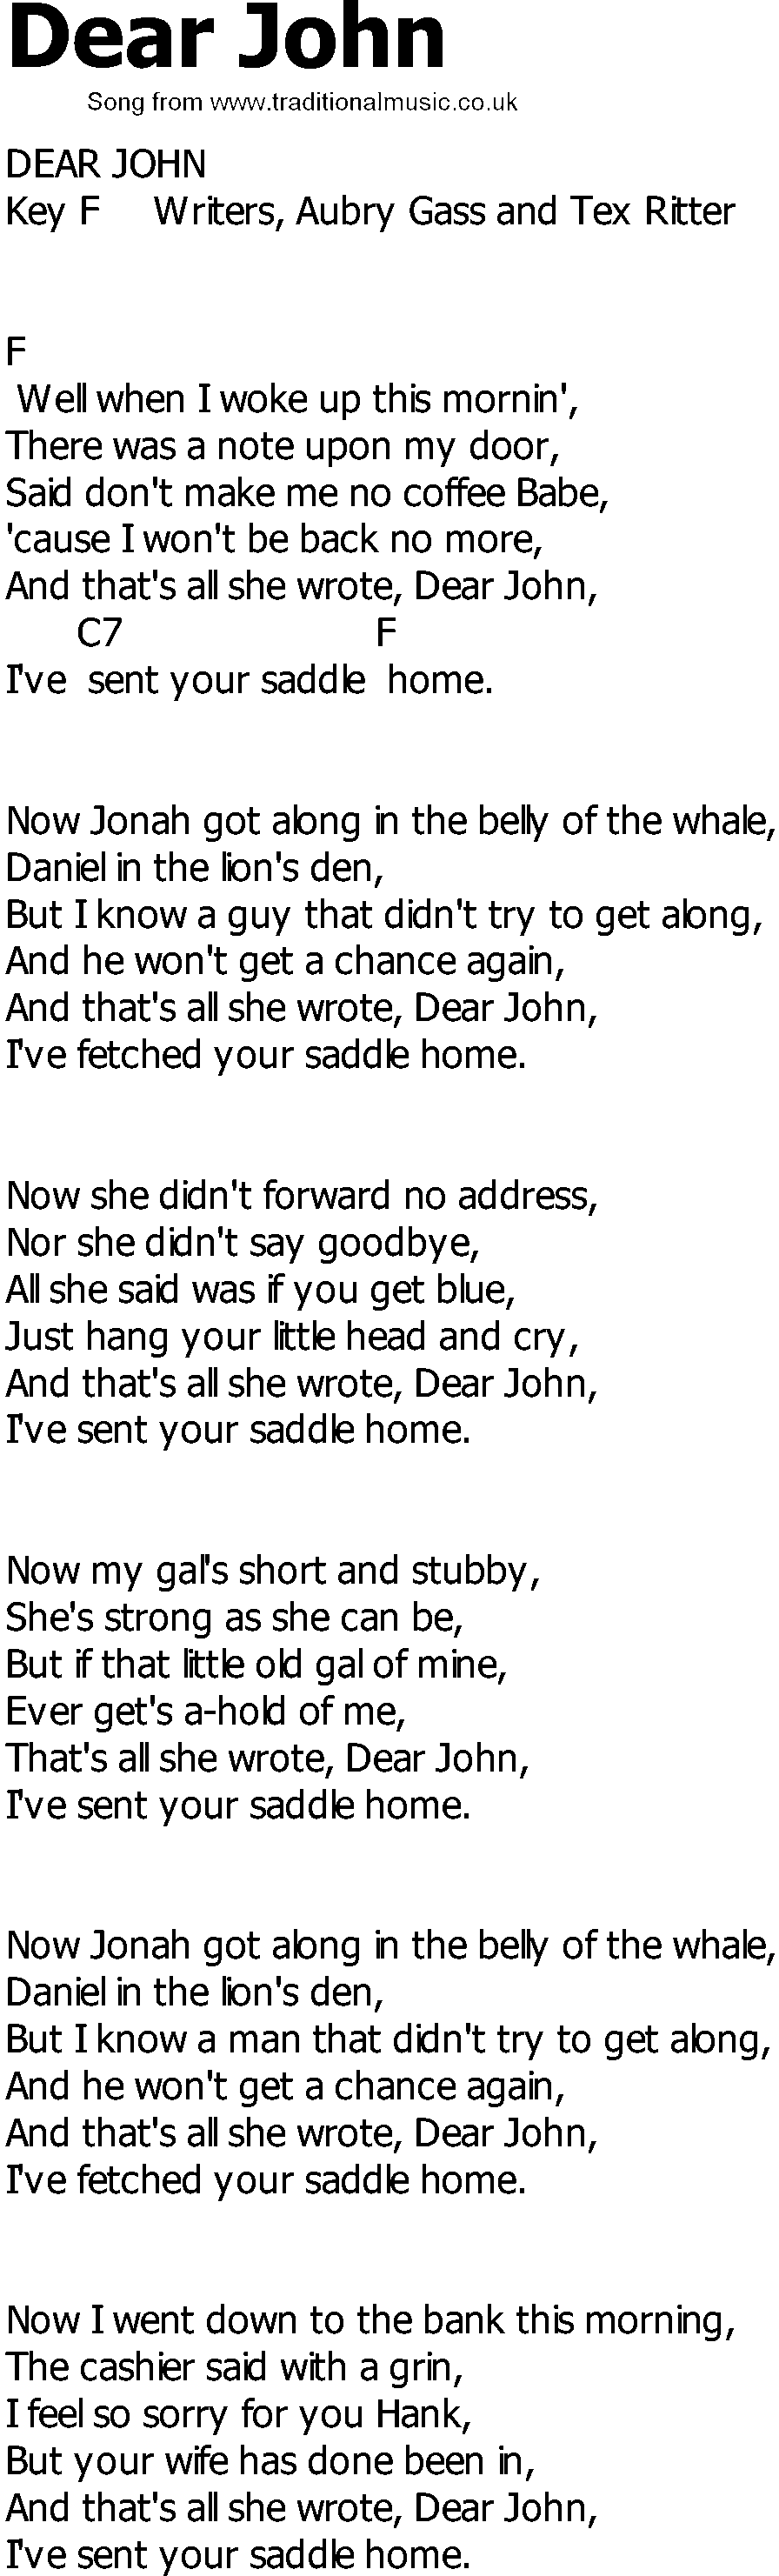 Old Country song lyrics with chords - Dear John